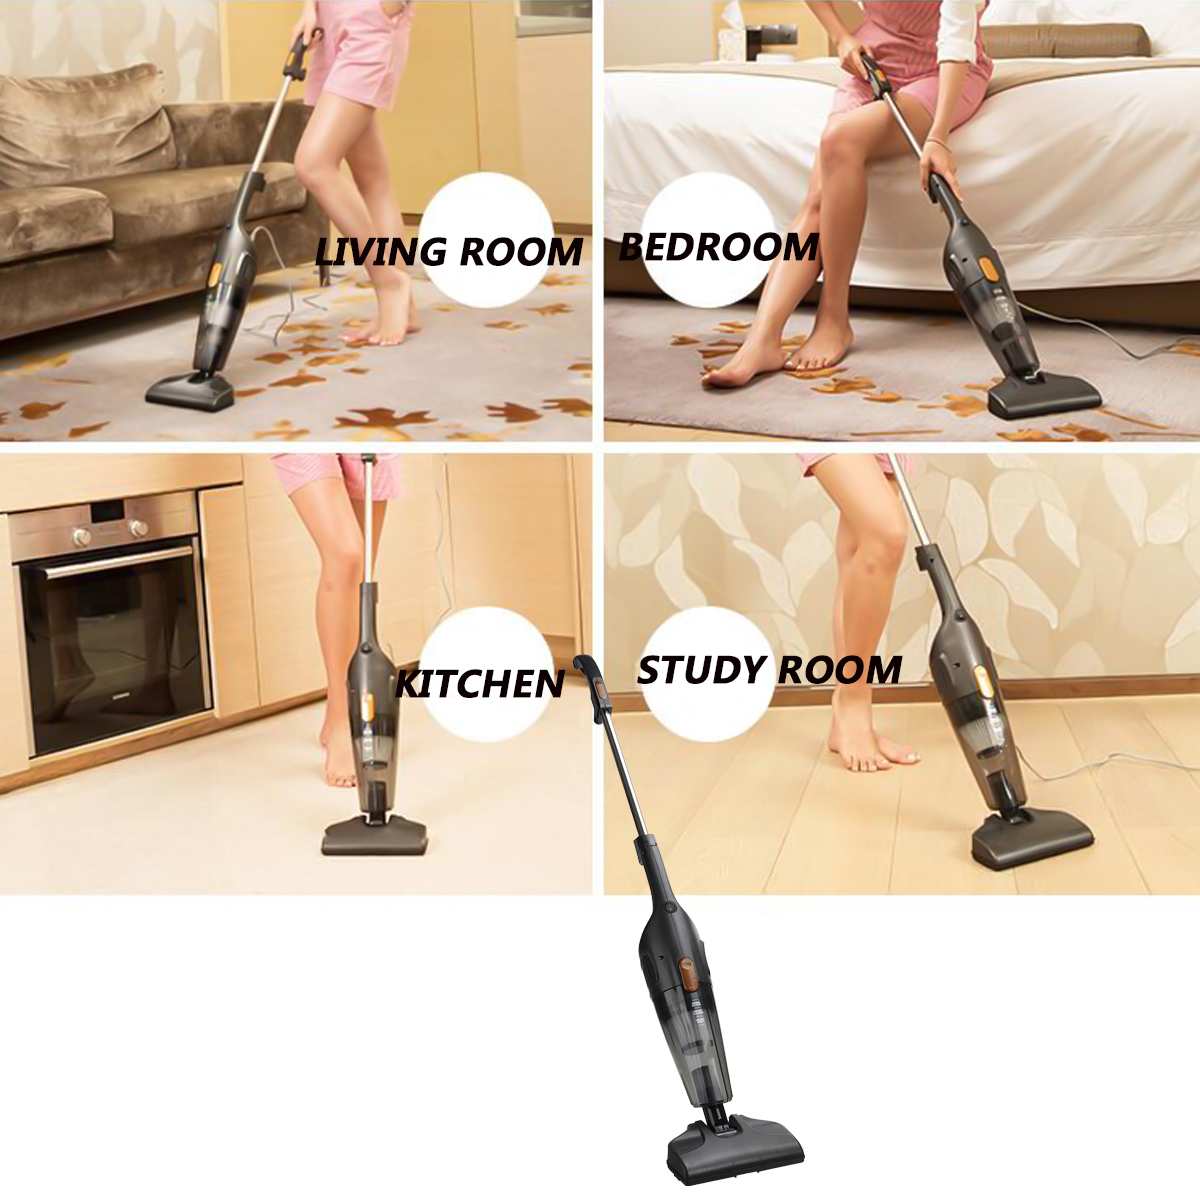 220V 600W All In 1 Upright Handheld Cordless Vacuum Cleaner Stick Home Cleaning Bagless Cleaning Supplies Utensilios Domesticos